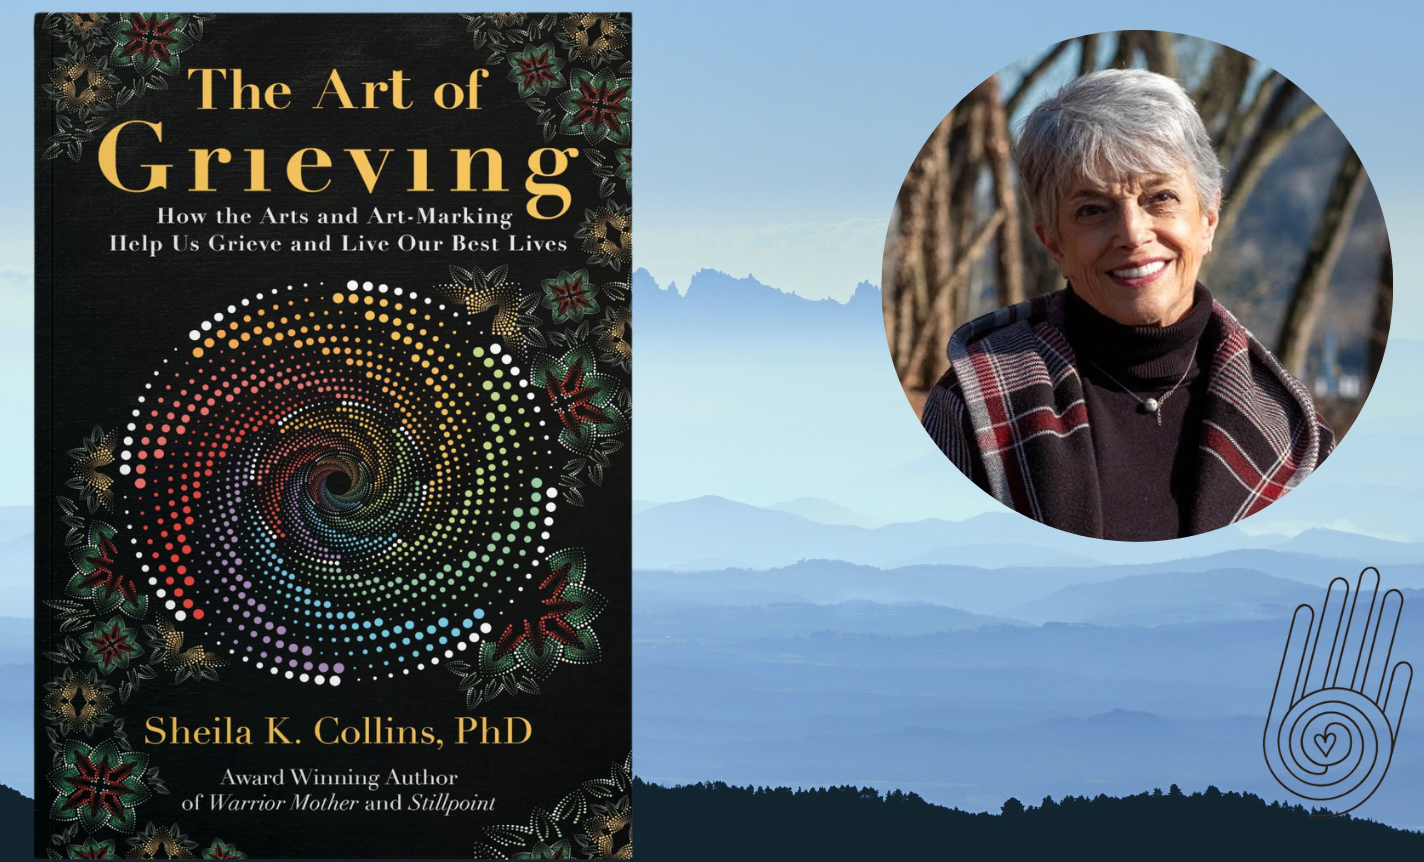 The Art of Grieving Series - Combining Arts for Artful Life